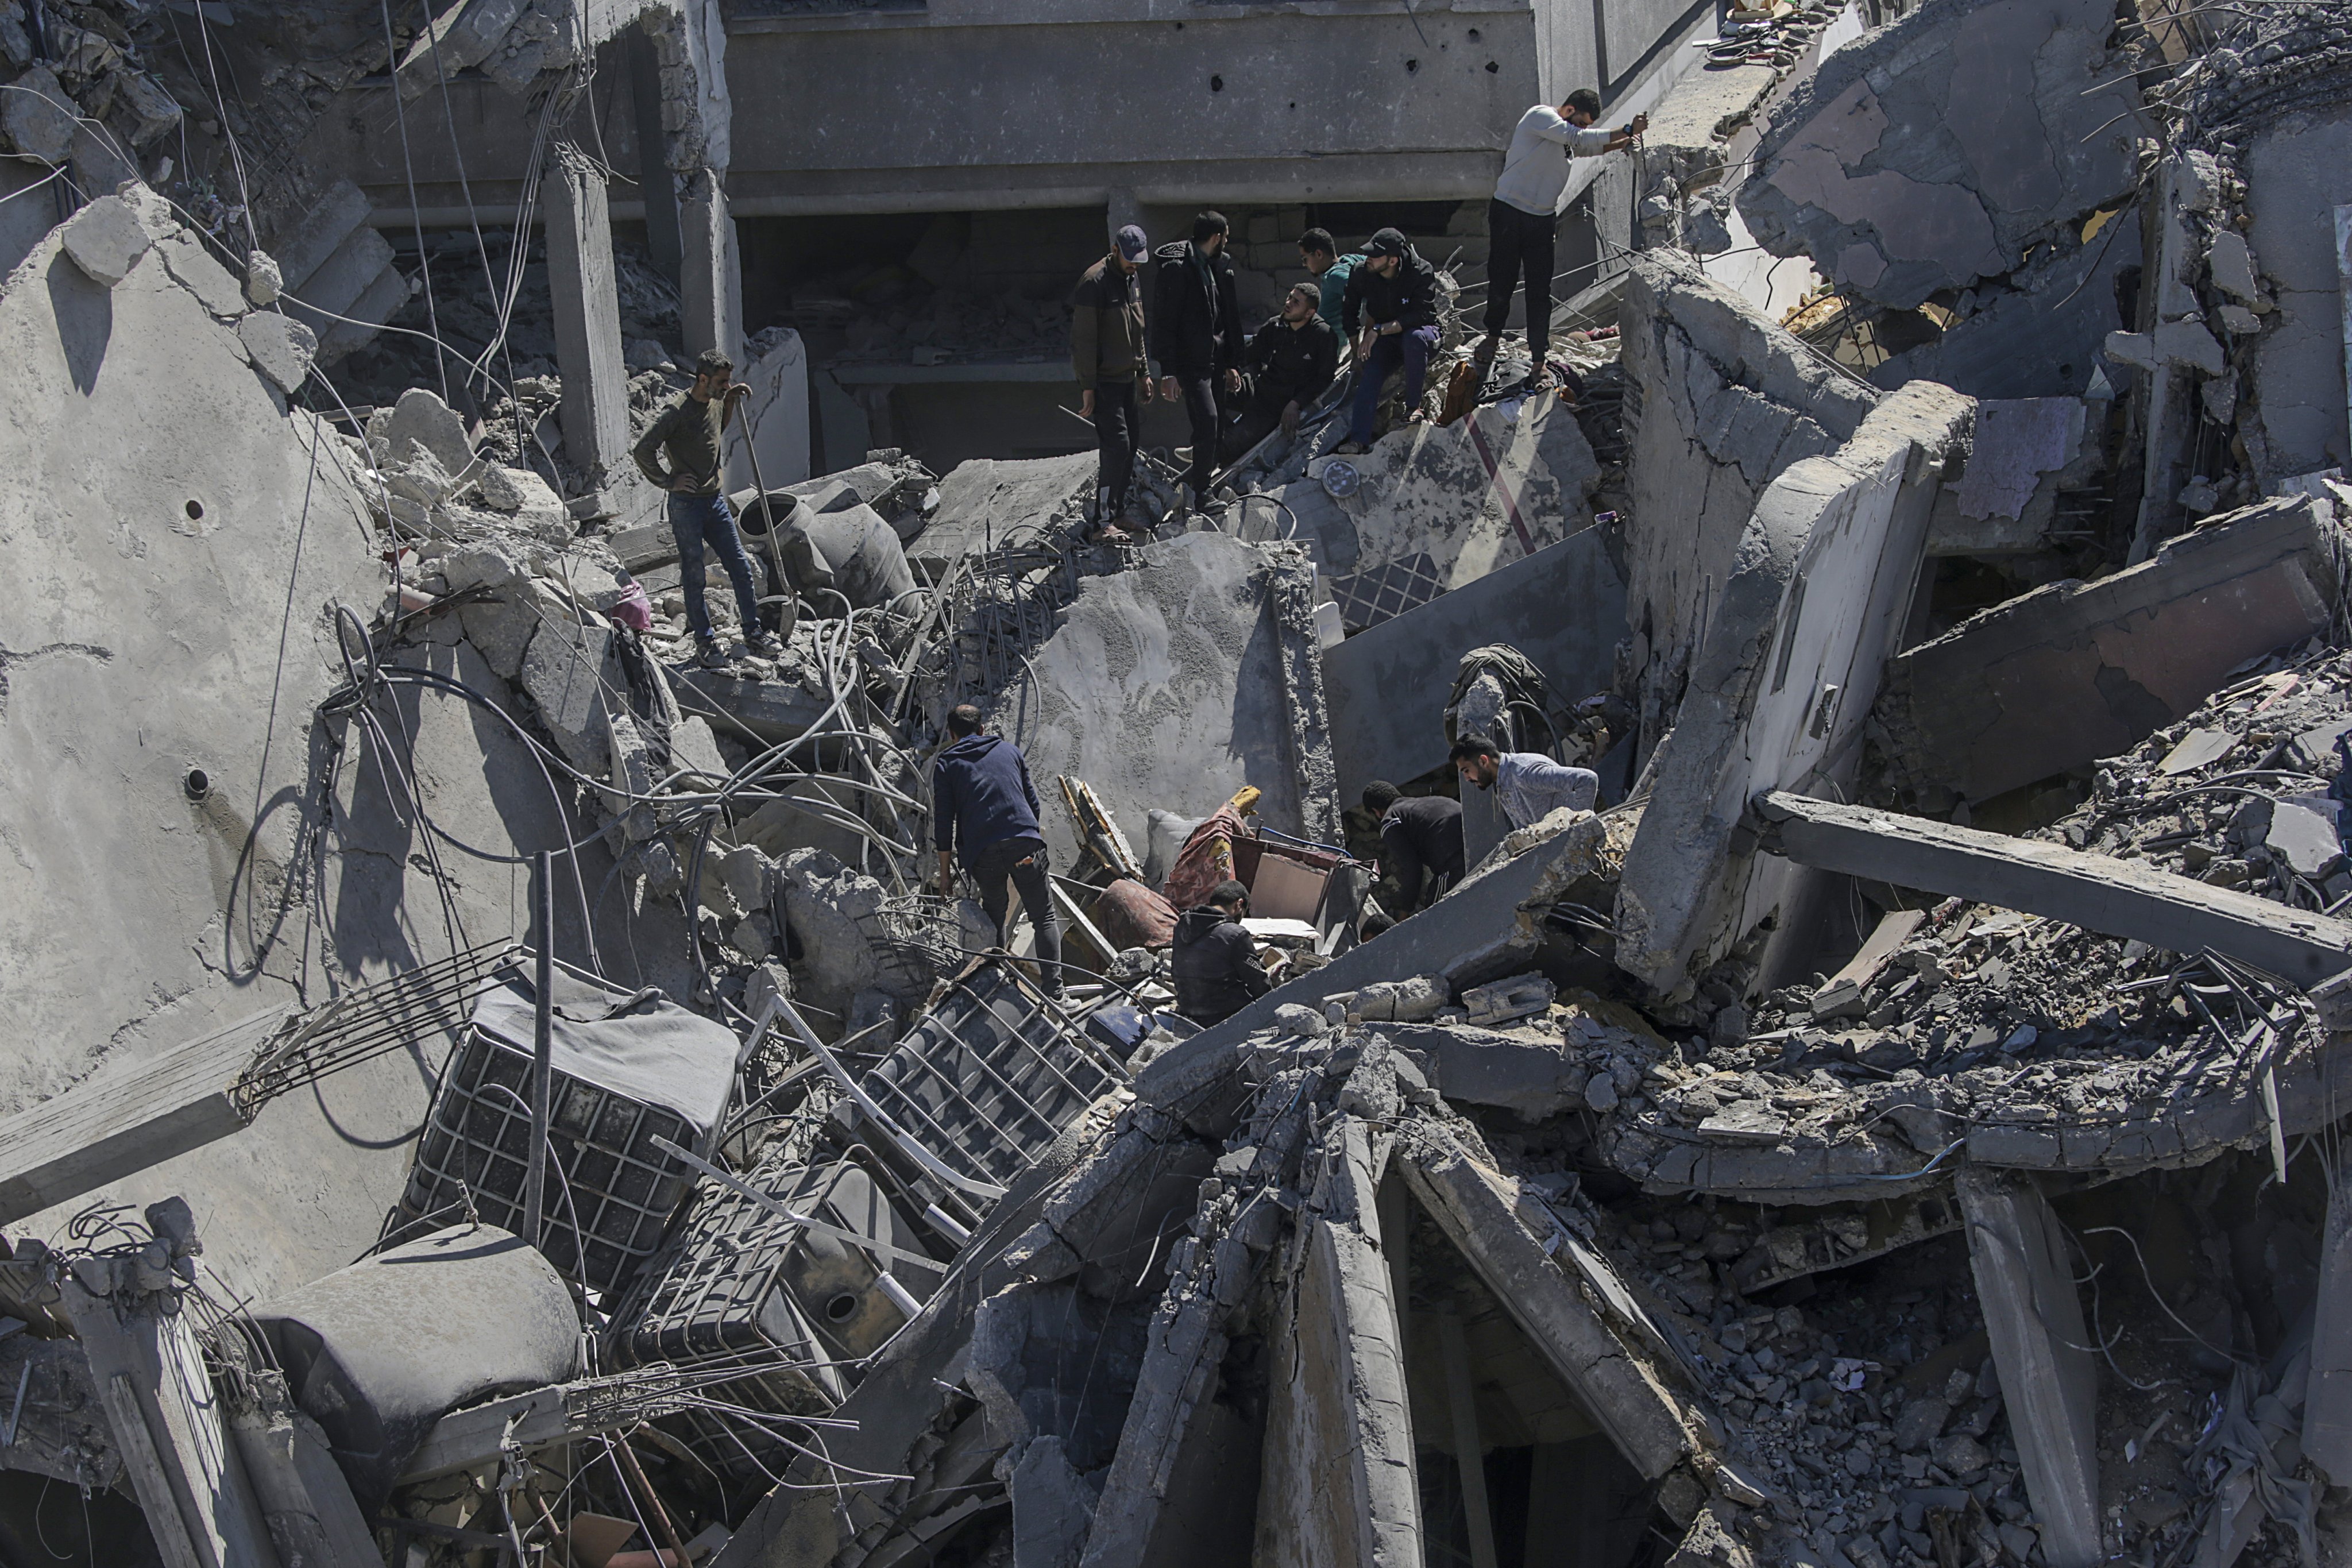 Palestinians search for missing people under rubble In the west of Al-Nusseirat refugee camp, Gaza Strip on March 5. Photo: EPA-EFE